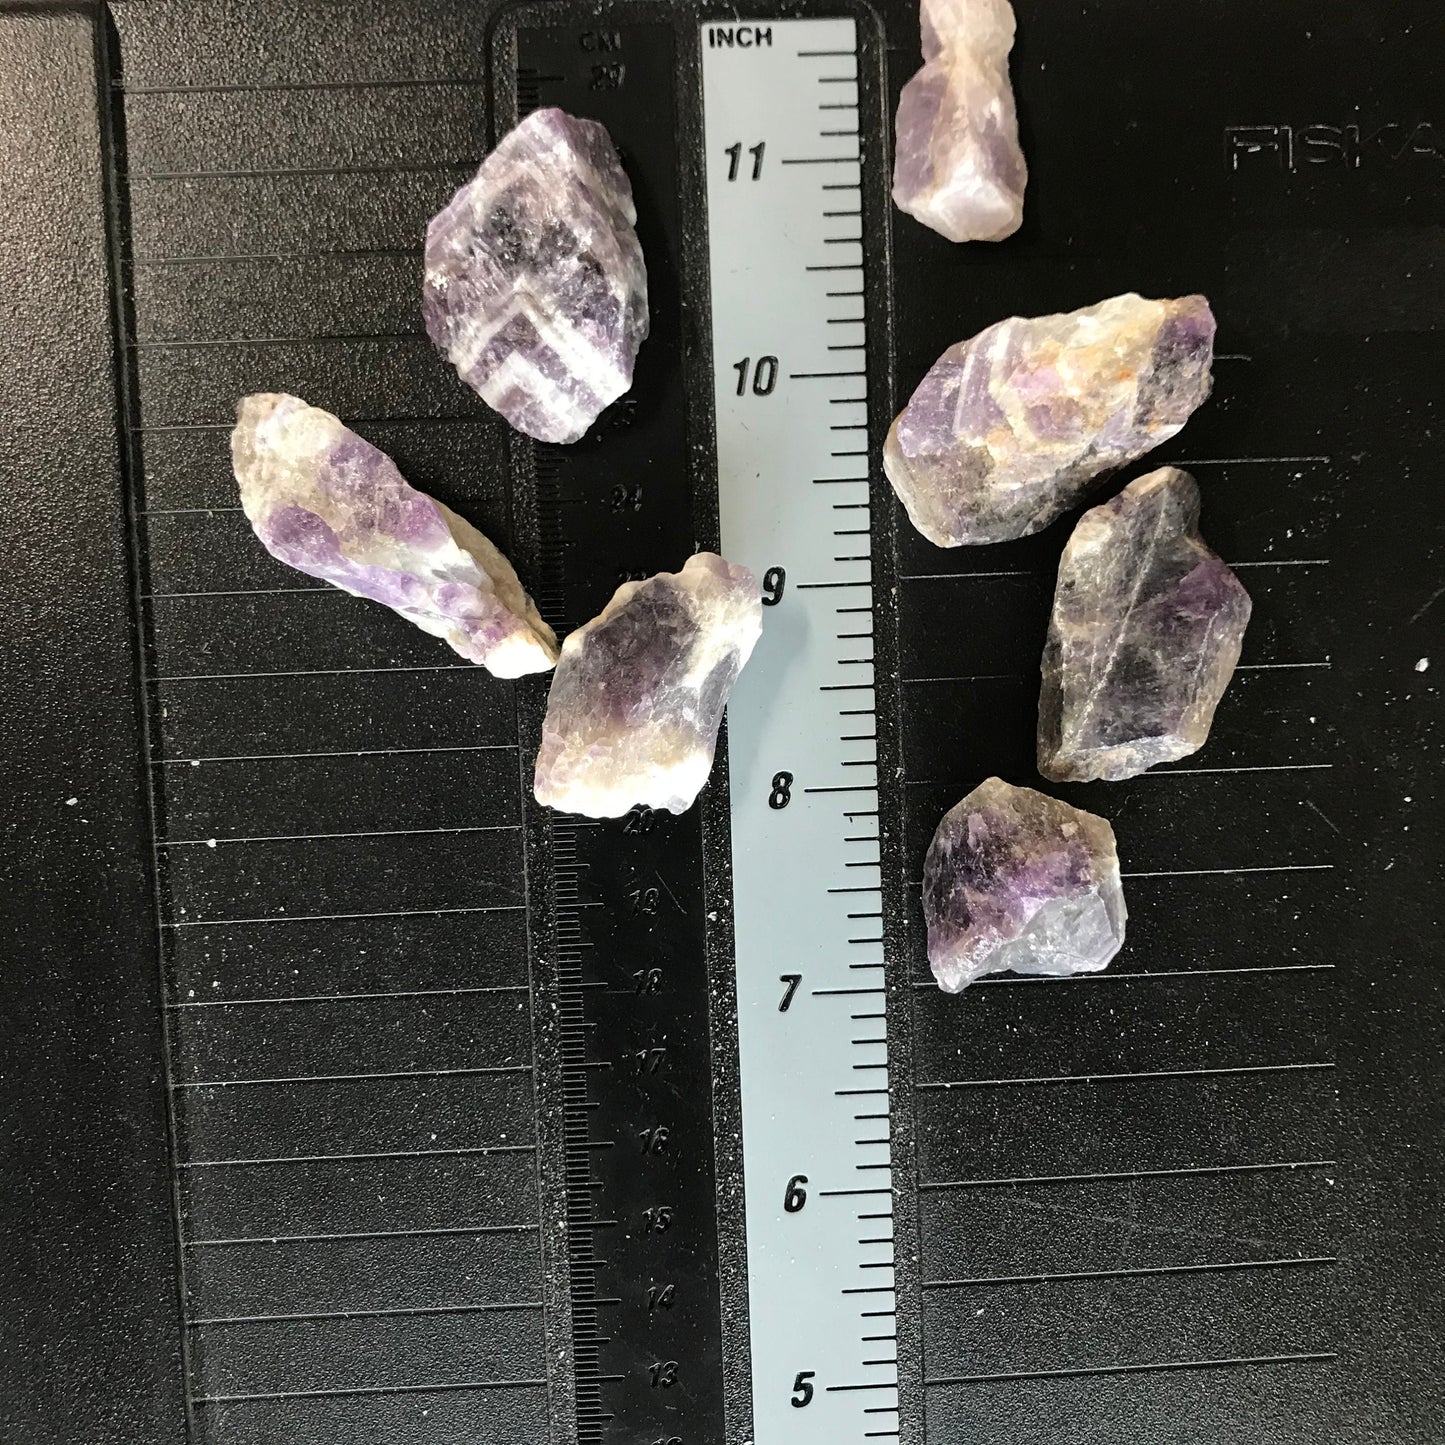 Amethyst Raw, Rough, Natural One Crystal (Approx 1"- 1 1/2"), Purple Amethyst, Supply for Crystal Grid or Wire Wrapping 0474